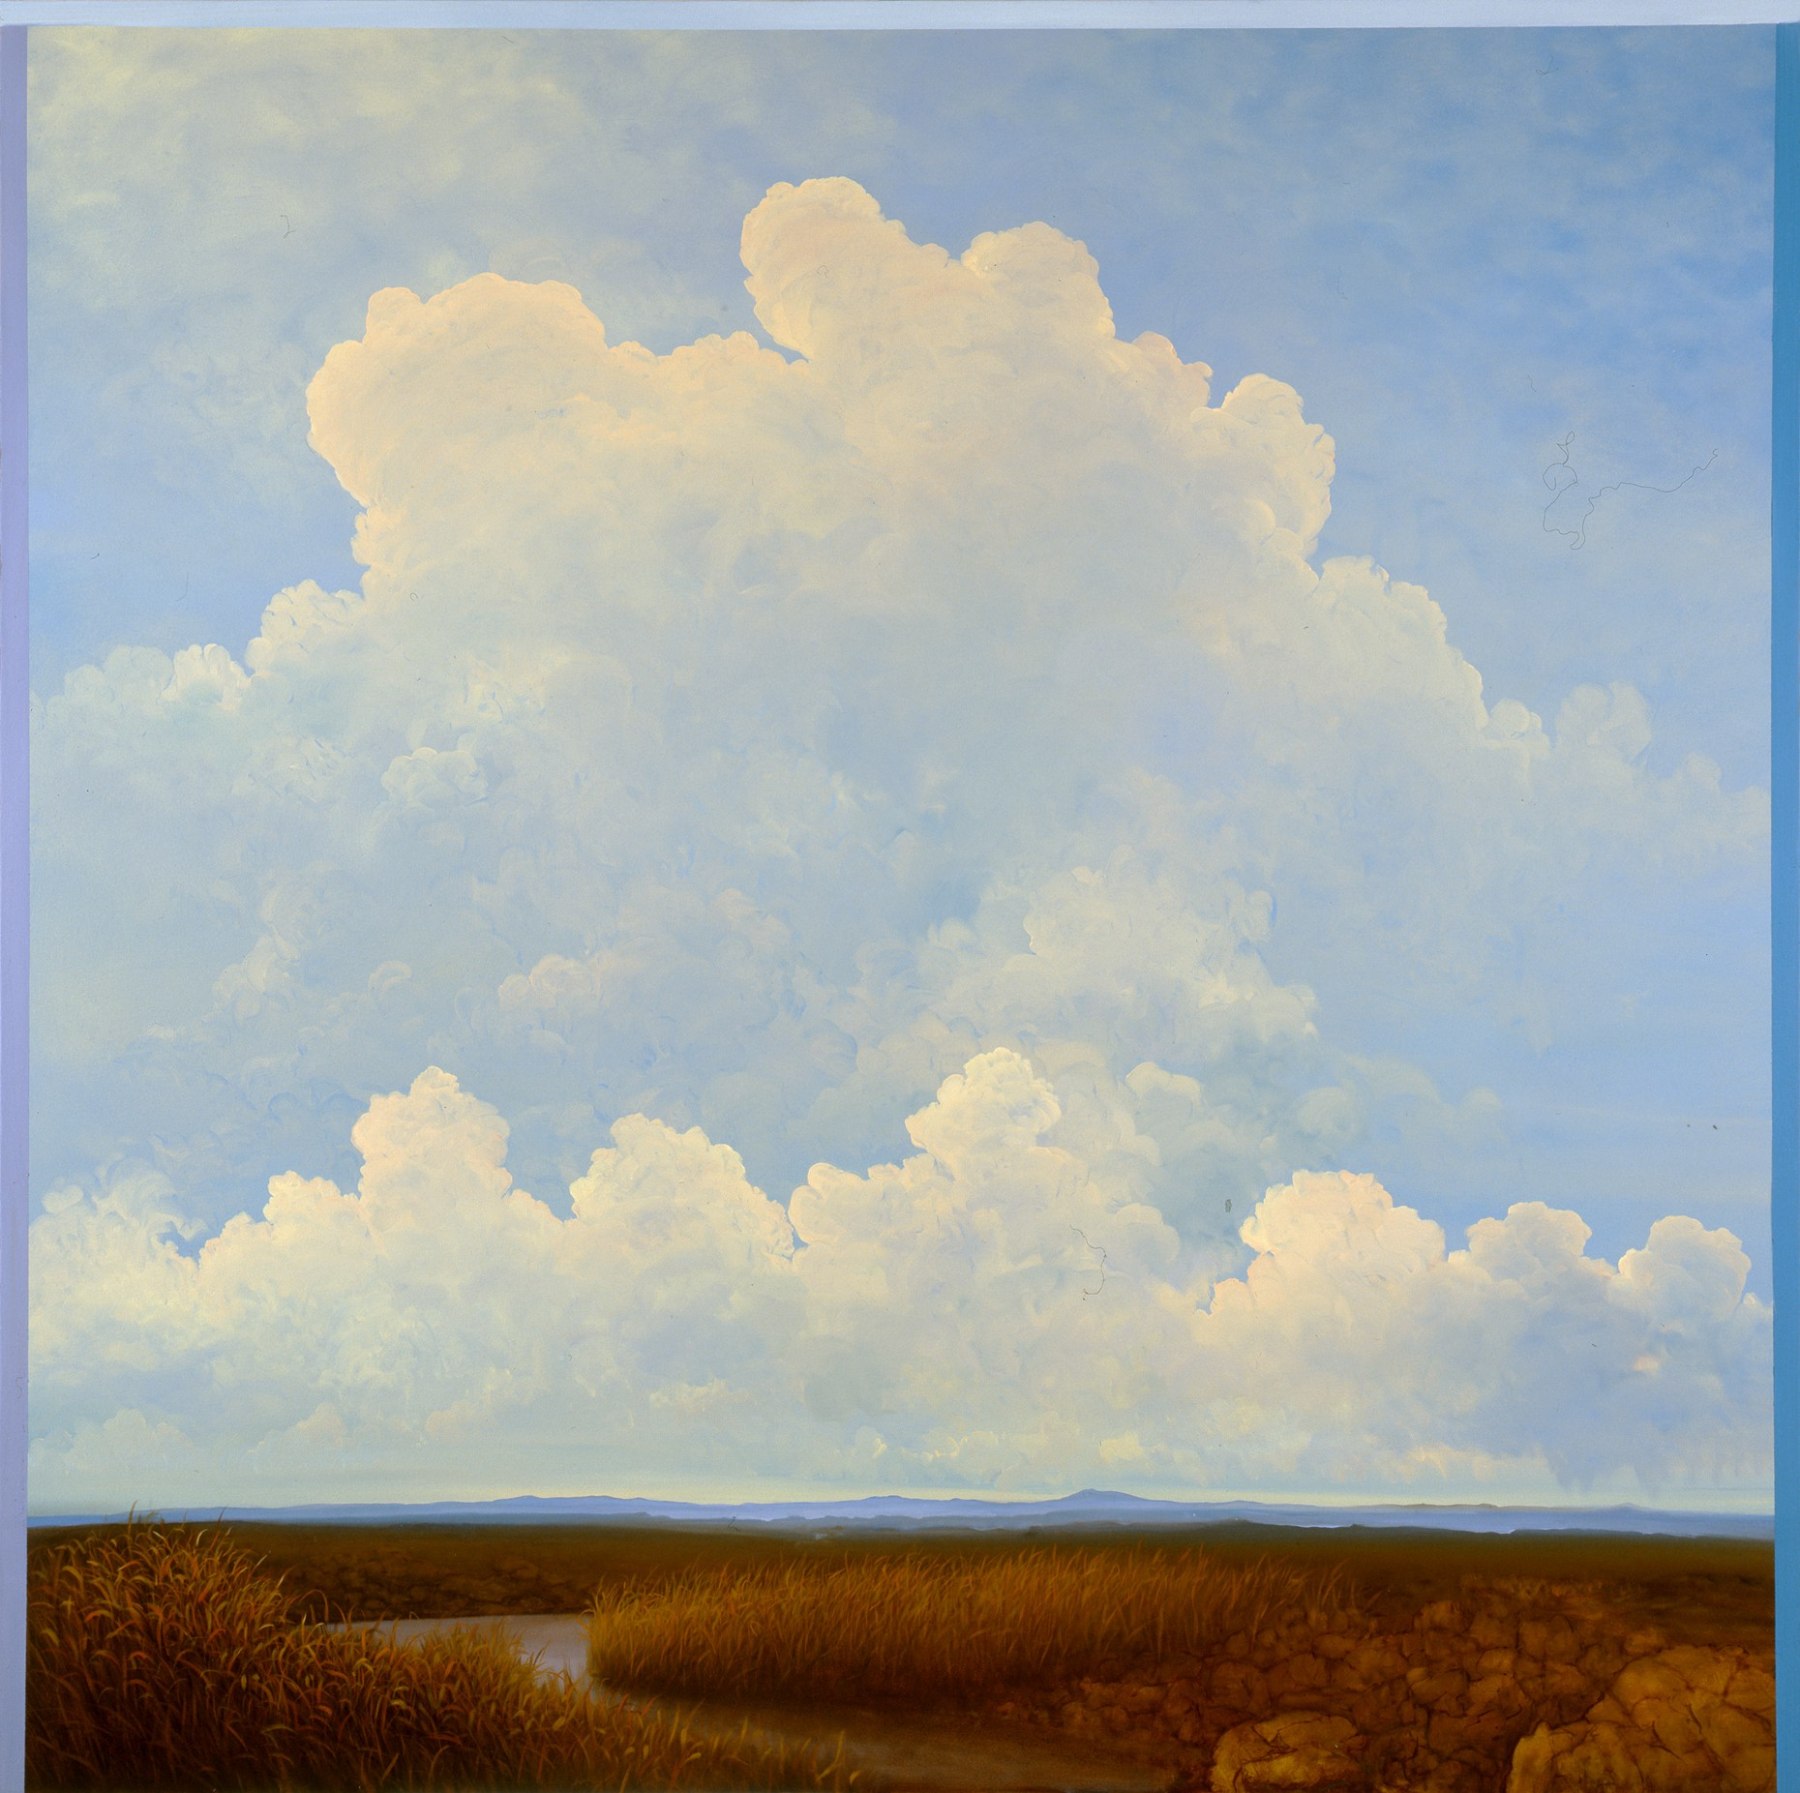 Tula Telfair, Justified by the Possibility (SOLD), 2008, oil on canvas, 60 x 60 inches